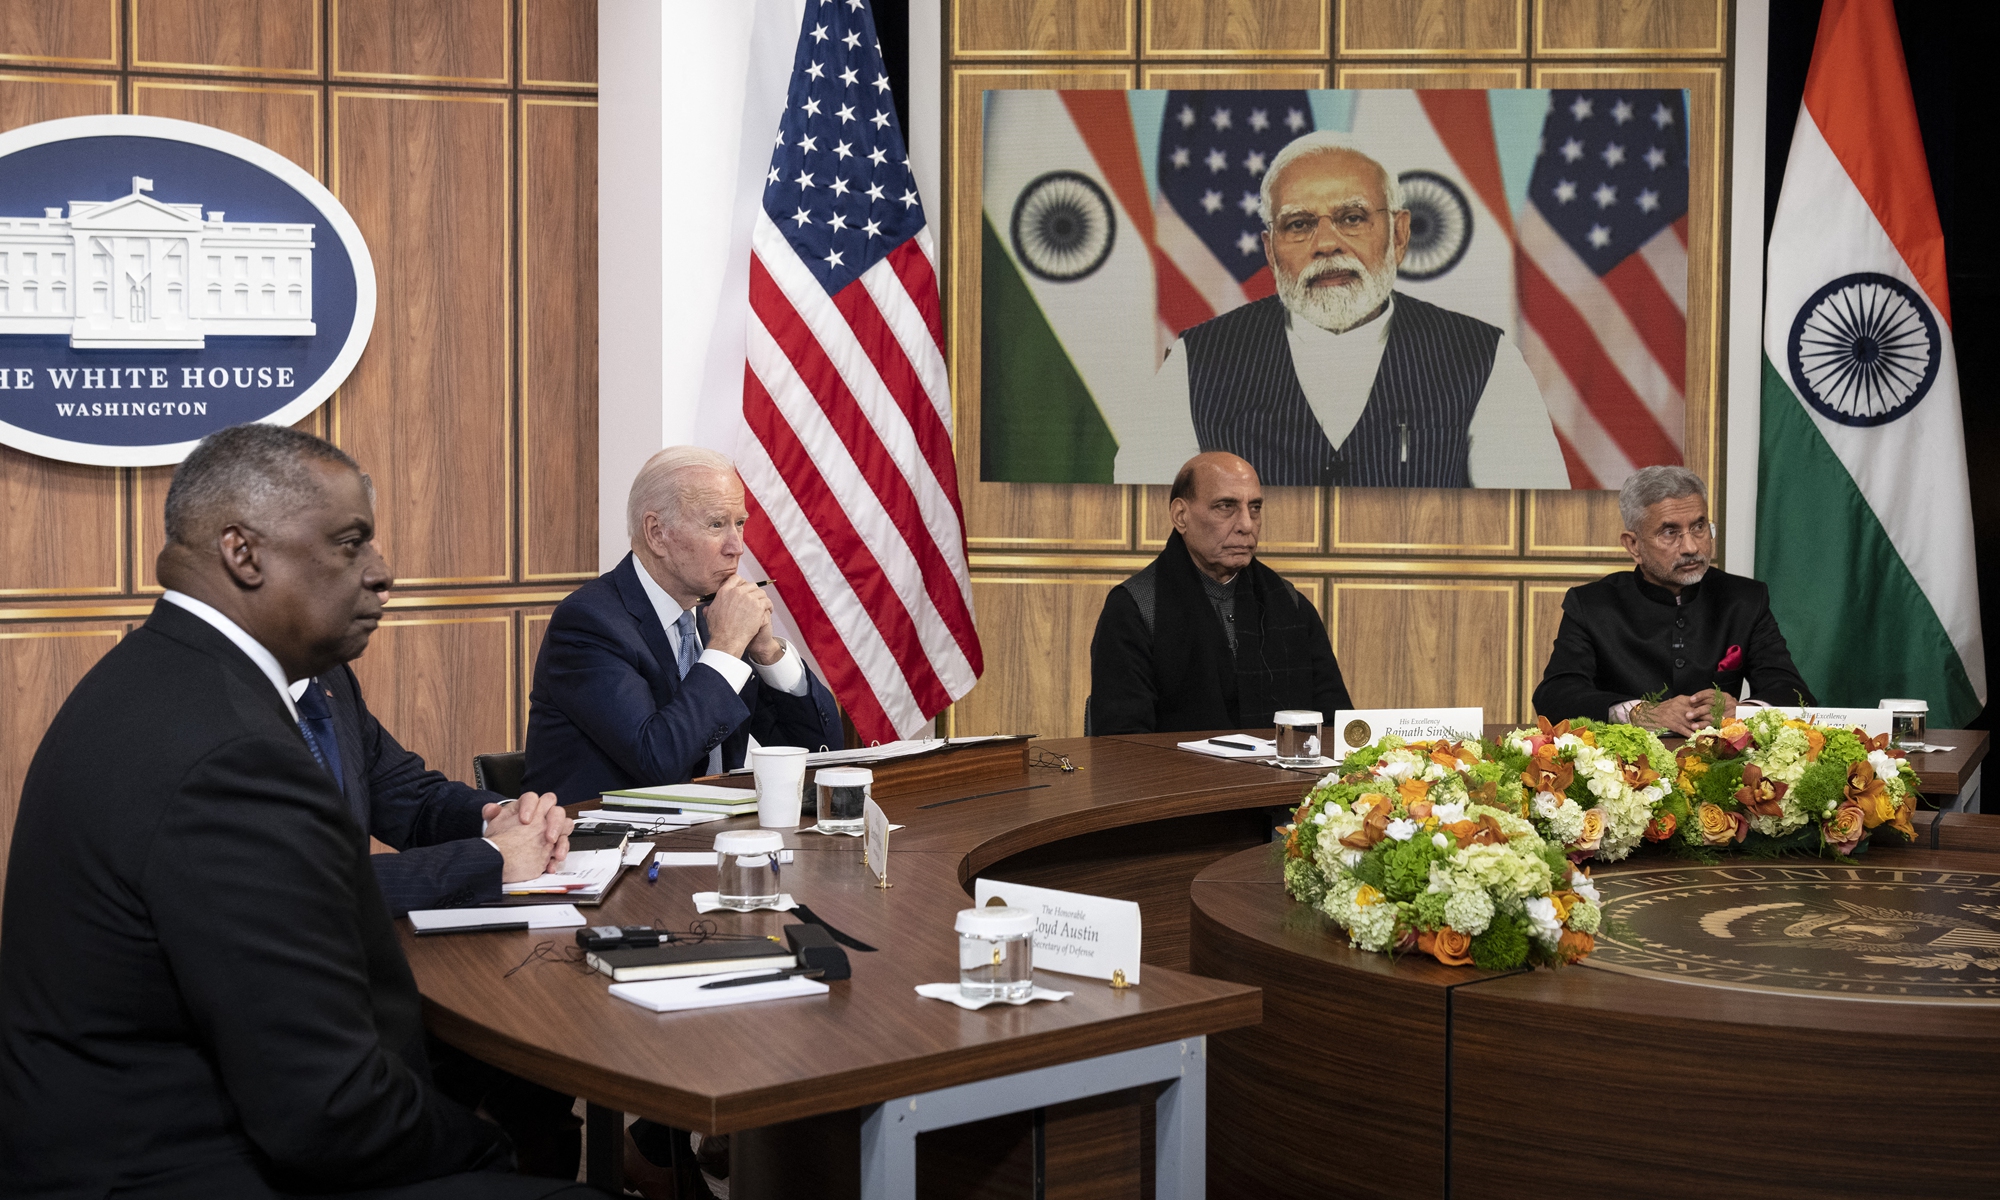 (From left to right) US Defense Secretary Lloyd Austin, US President Joe Biden, Indian Minister of Defense Rajnath Singh, and Indian External Affairs Minister Subrahmanyam Jaishankar listen as Prime Minister of India Narendra Modi (on screen) speaks during a virtual meeting in the South Court Auditorium of the White House complex April 11, 2022 in Washington, DC.Photo: AFP